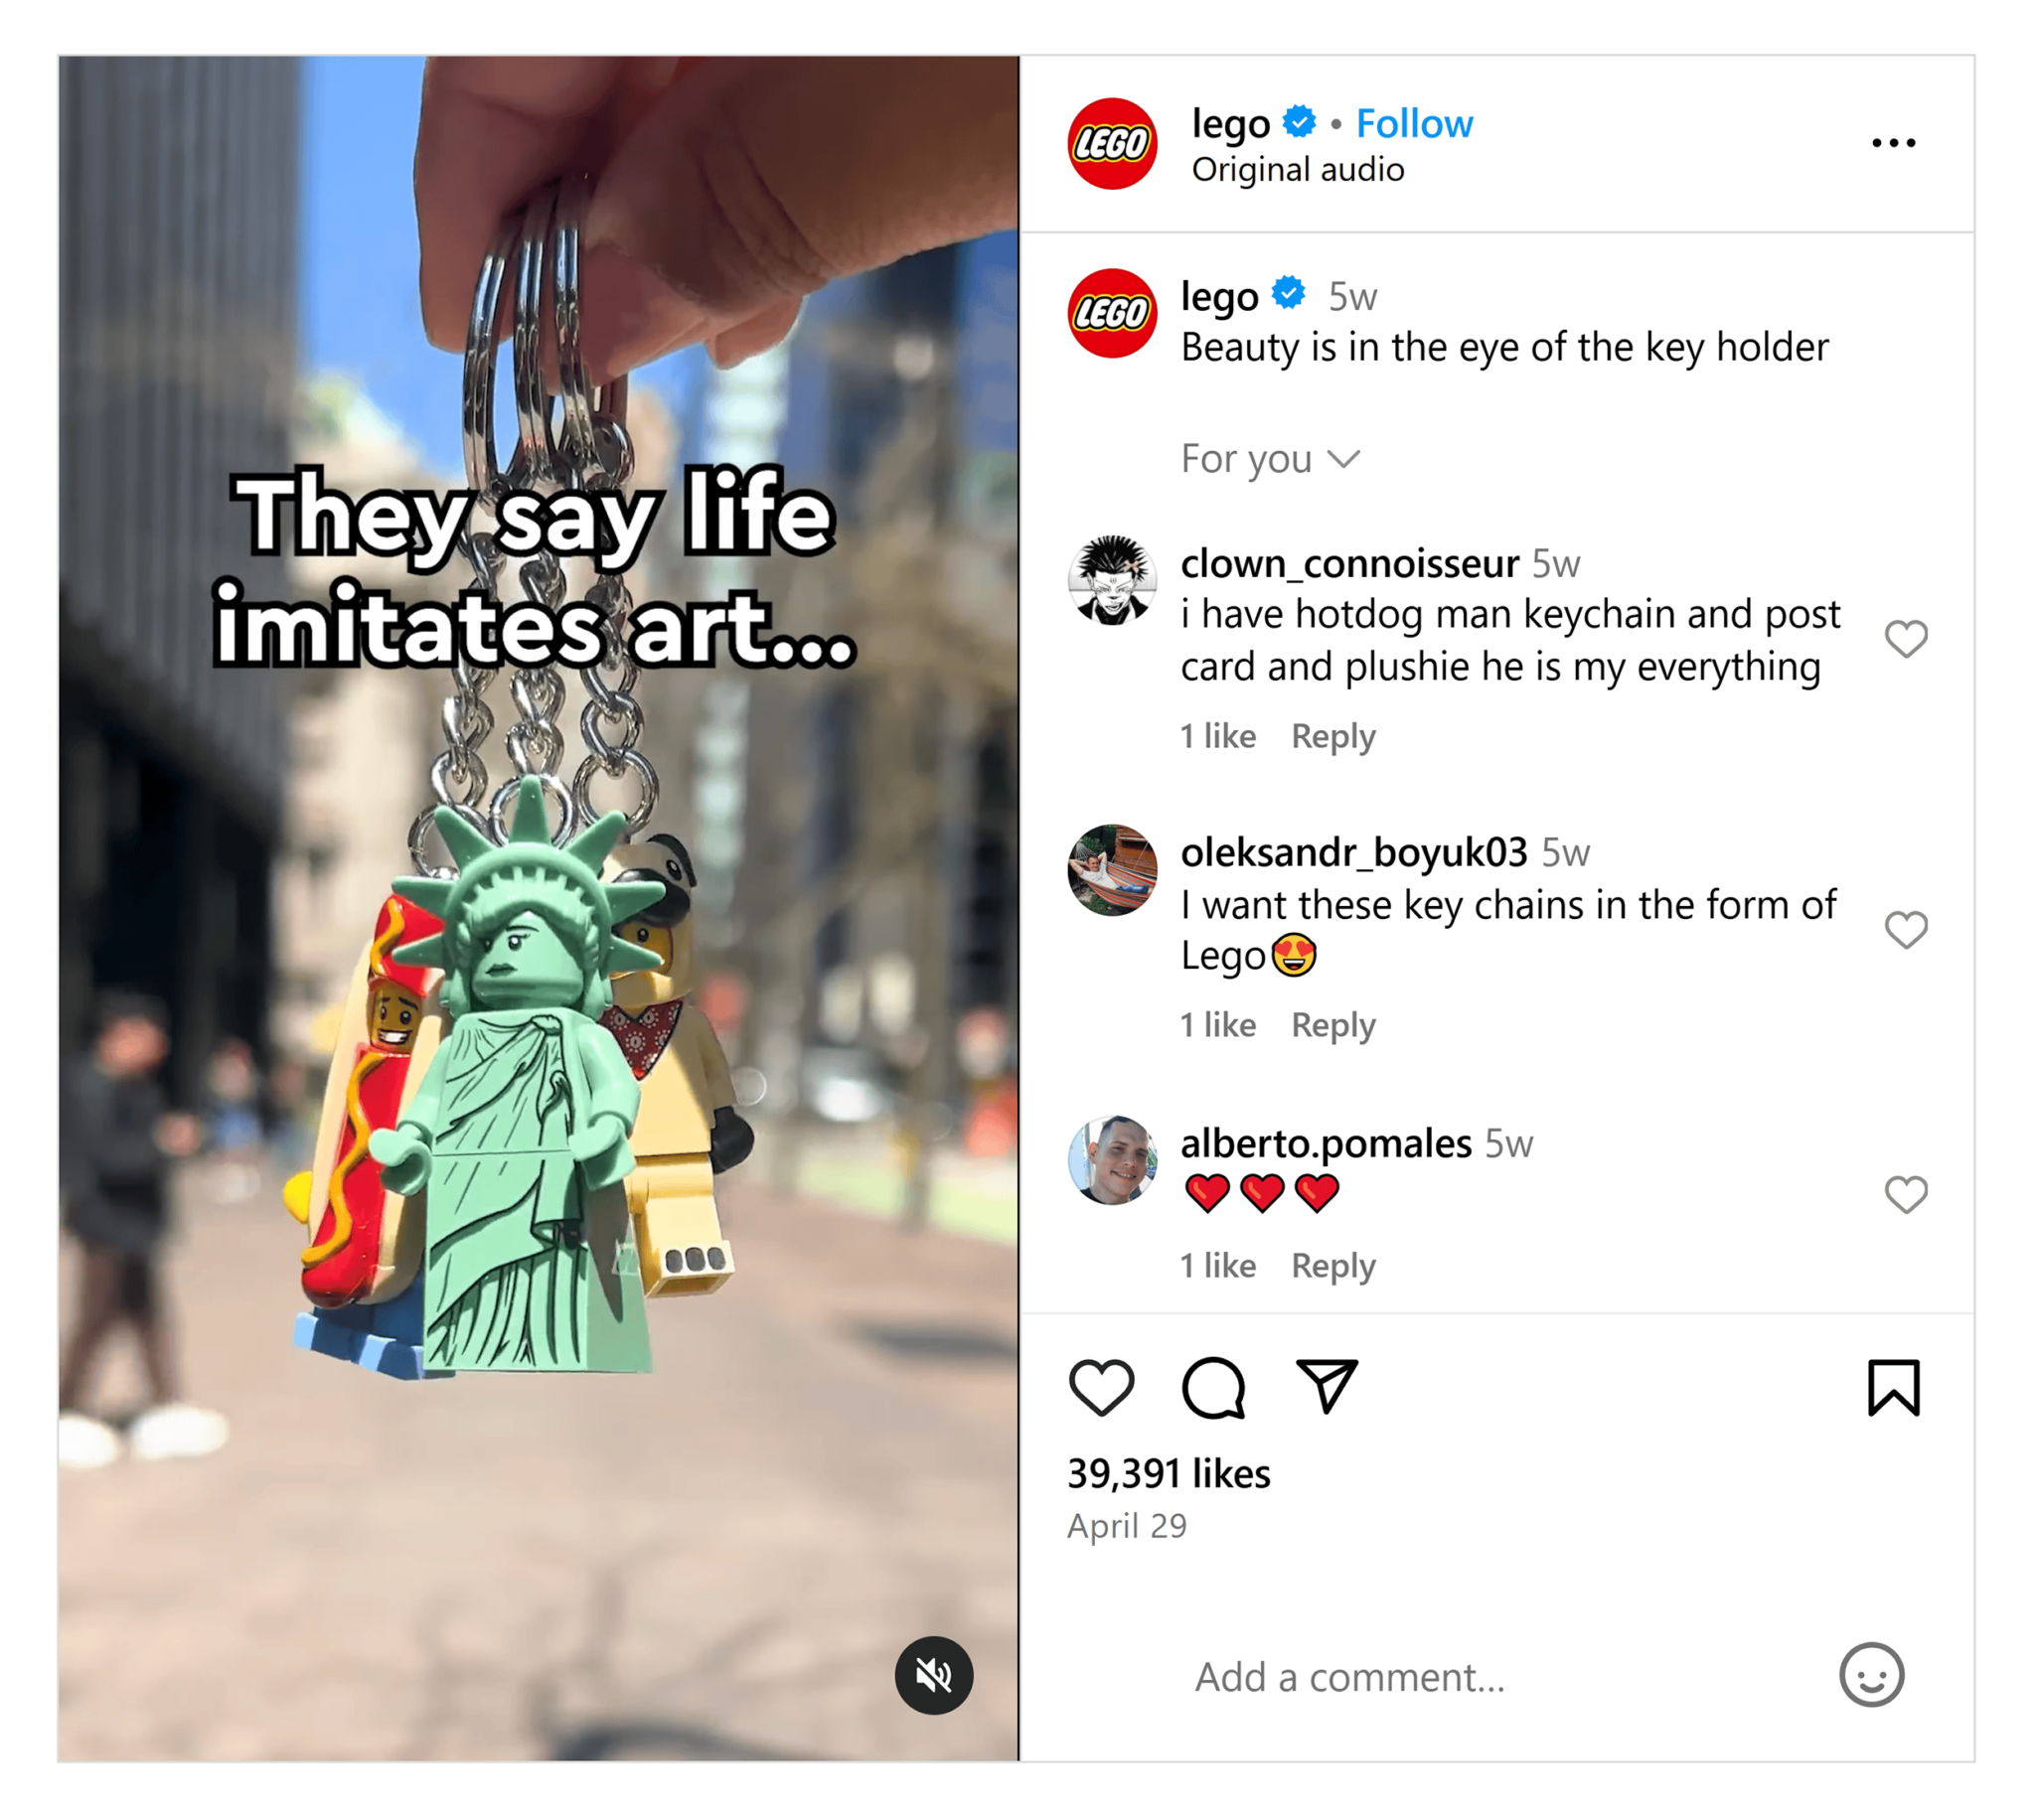 instagram-lego-keychains Ecommerce Marketing: 11 Strategies to Drive Traffic and Sales